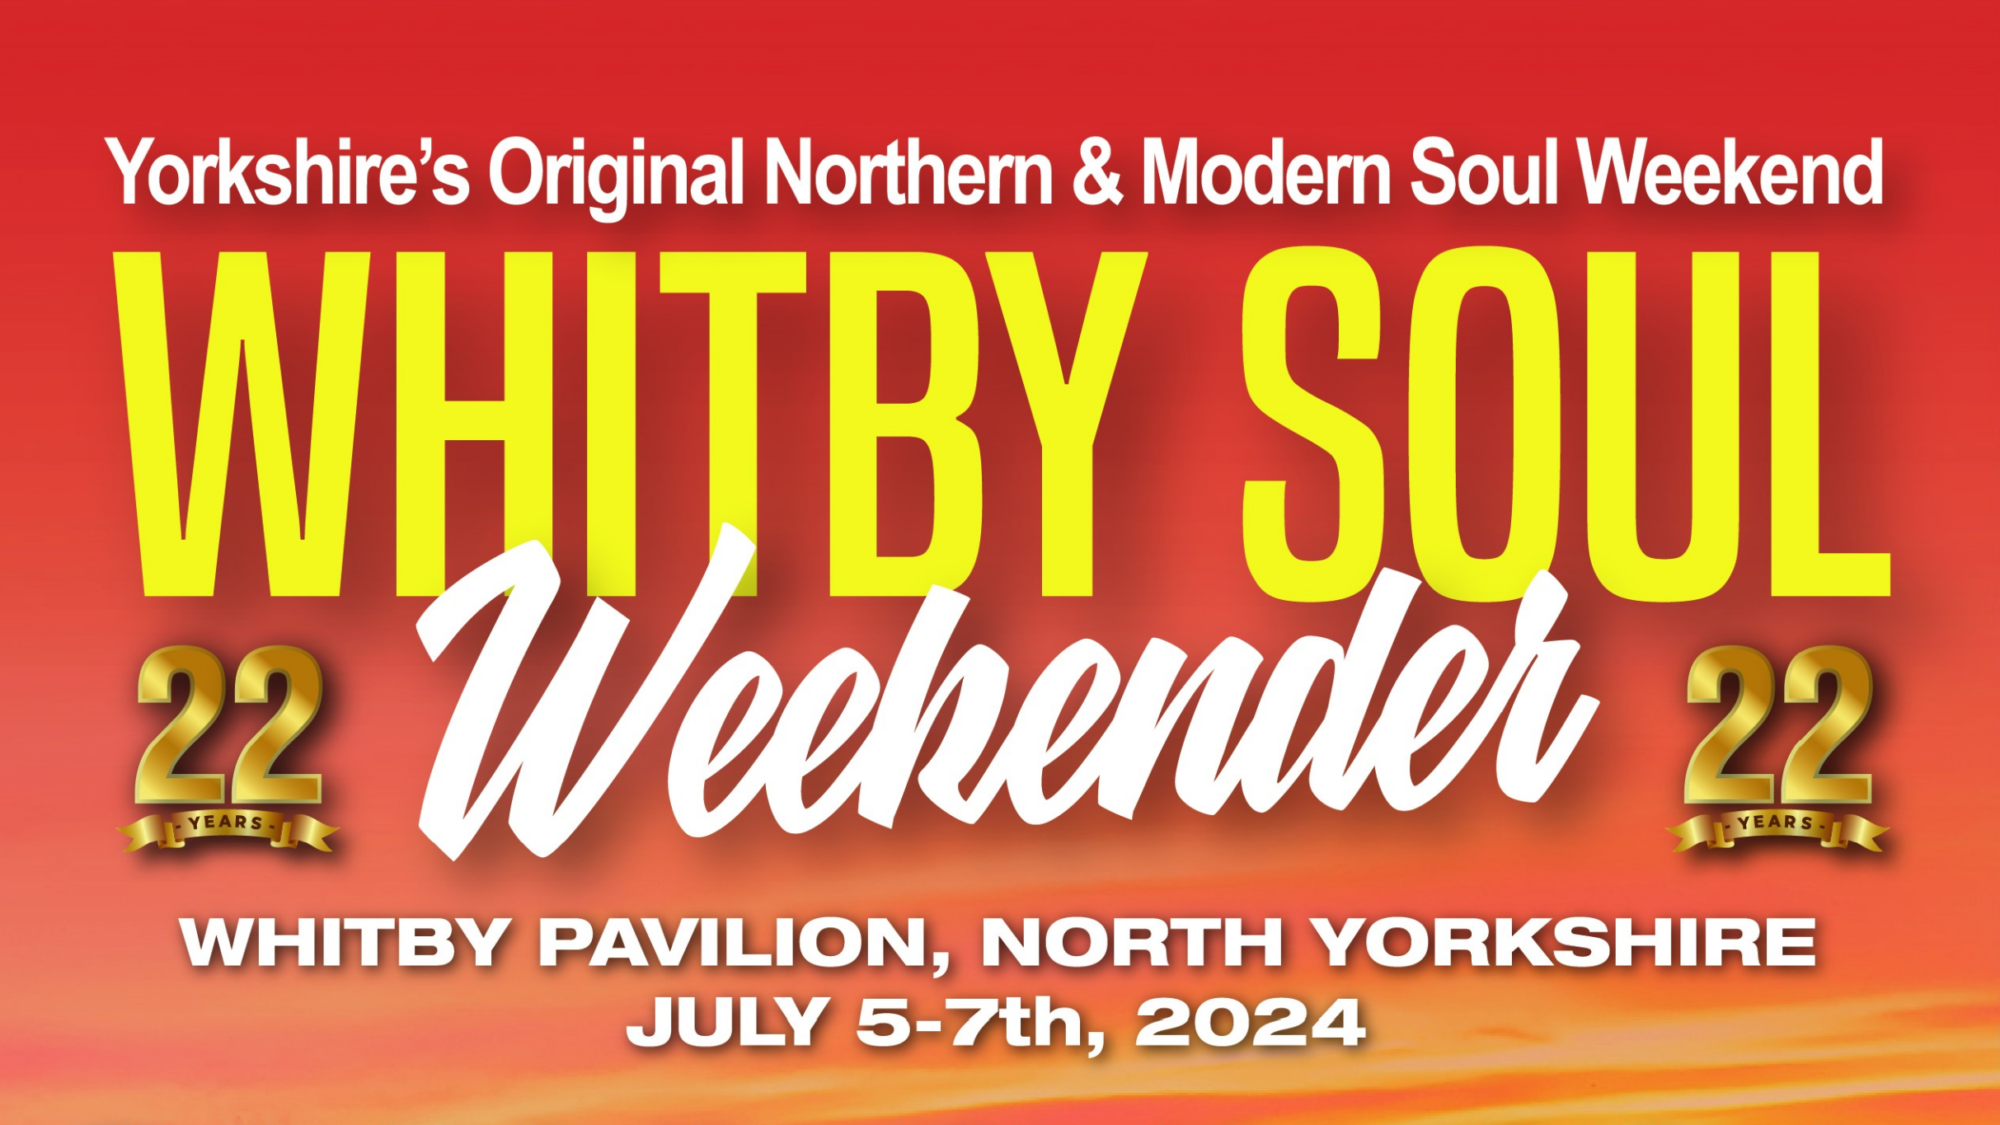 Image name Whitby Soul Weekender Full Weekend at Whitby Pavilion Northern Lights Suite Whitby the 1 image from the post Whitby Soul Weekender (Full Weekend) at Whitby Pavilion Northern Lights Suite, Whitby in Yorkshire.com.